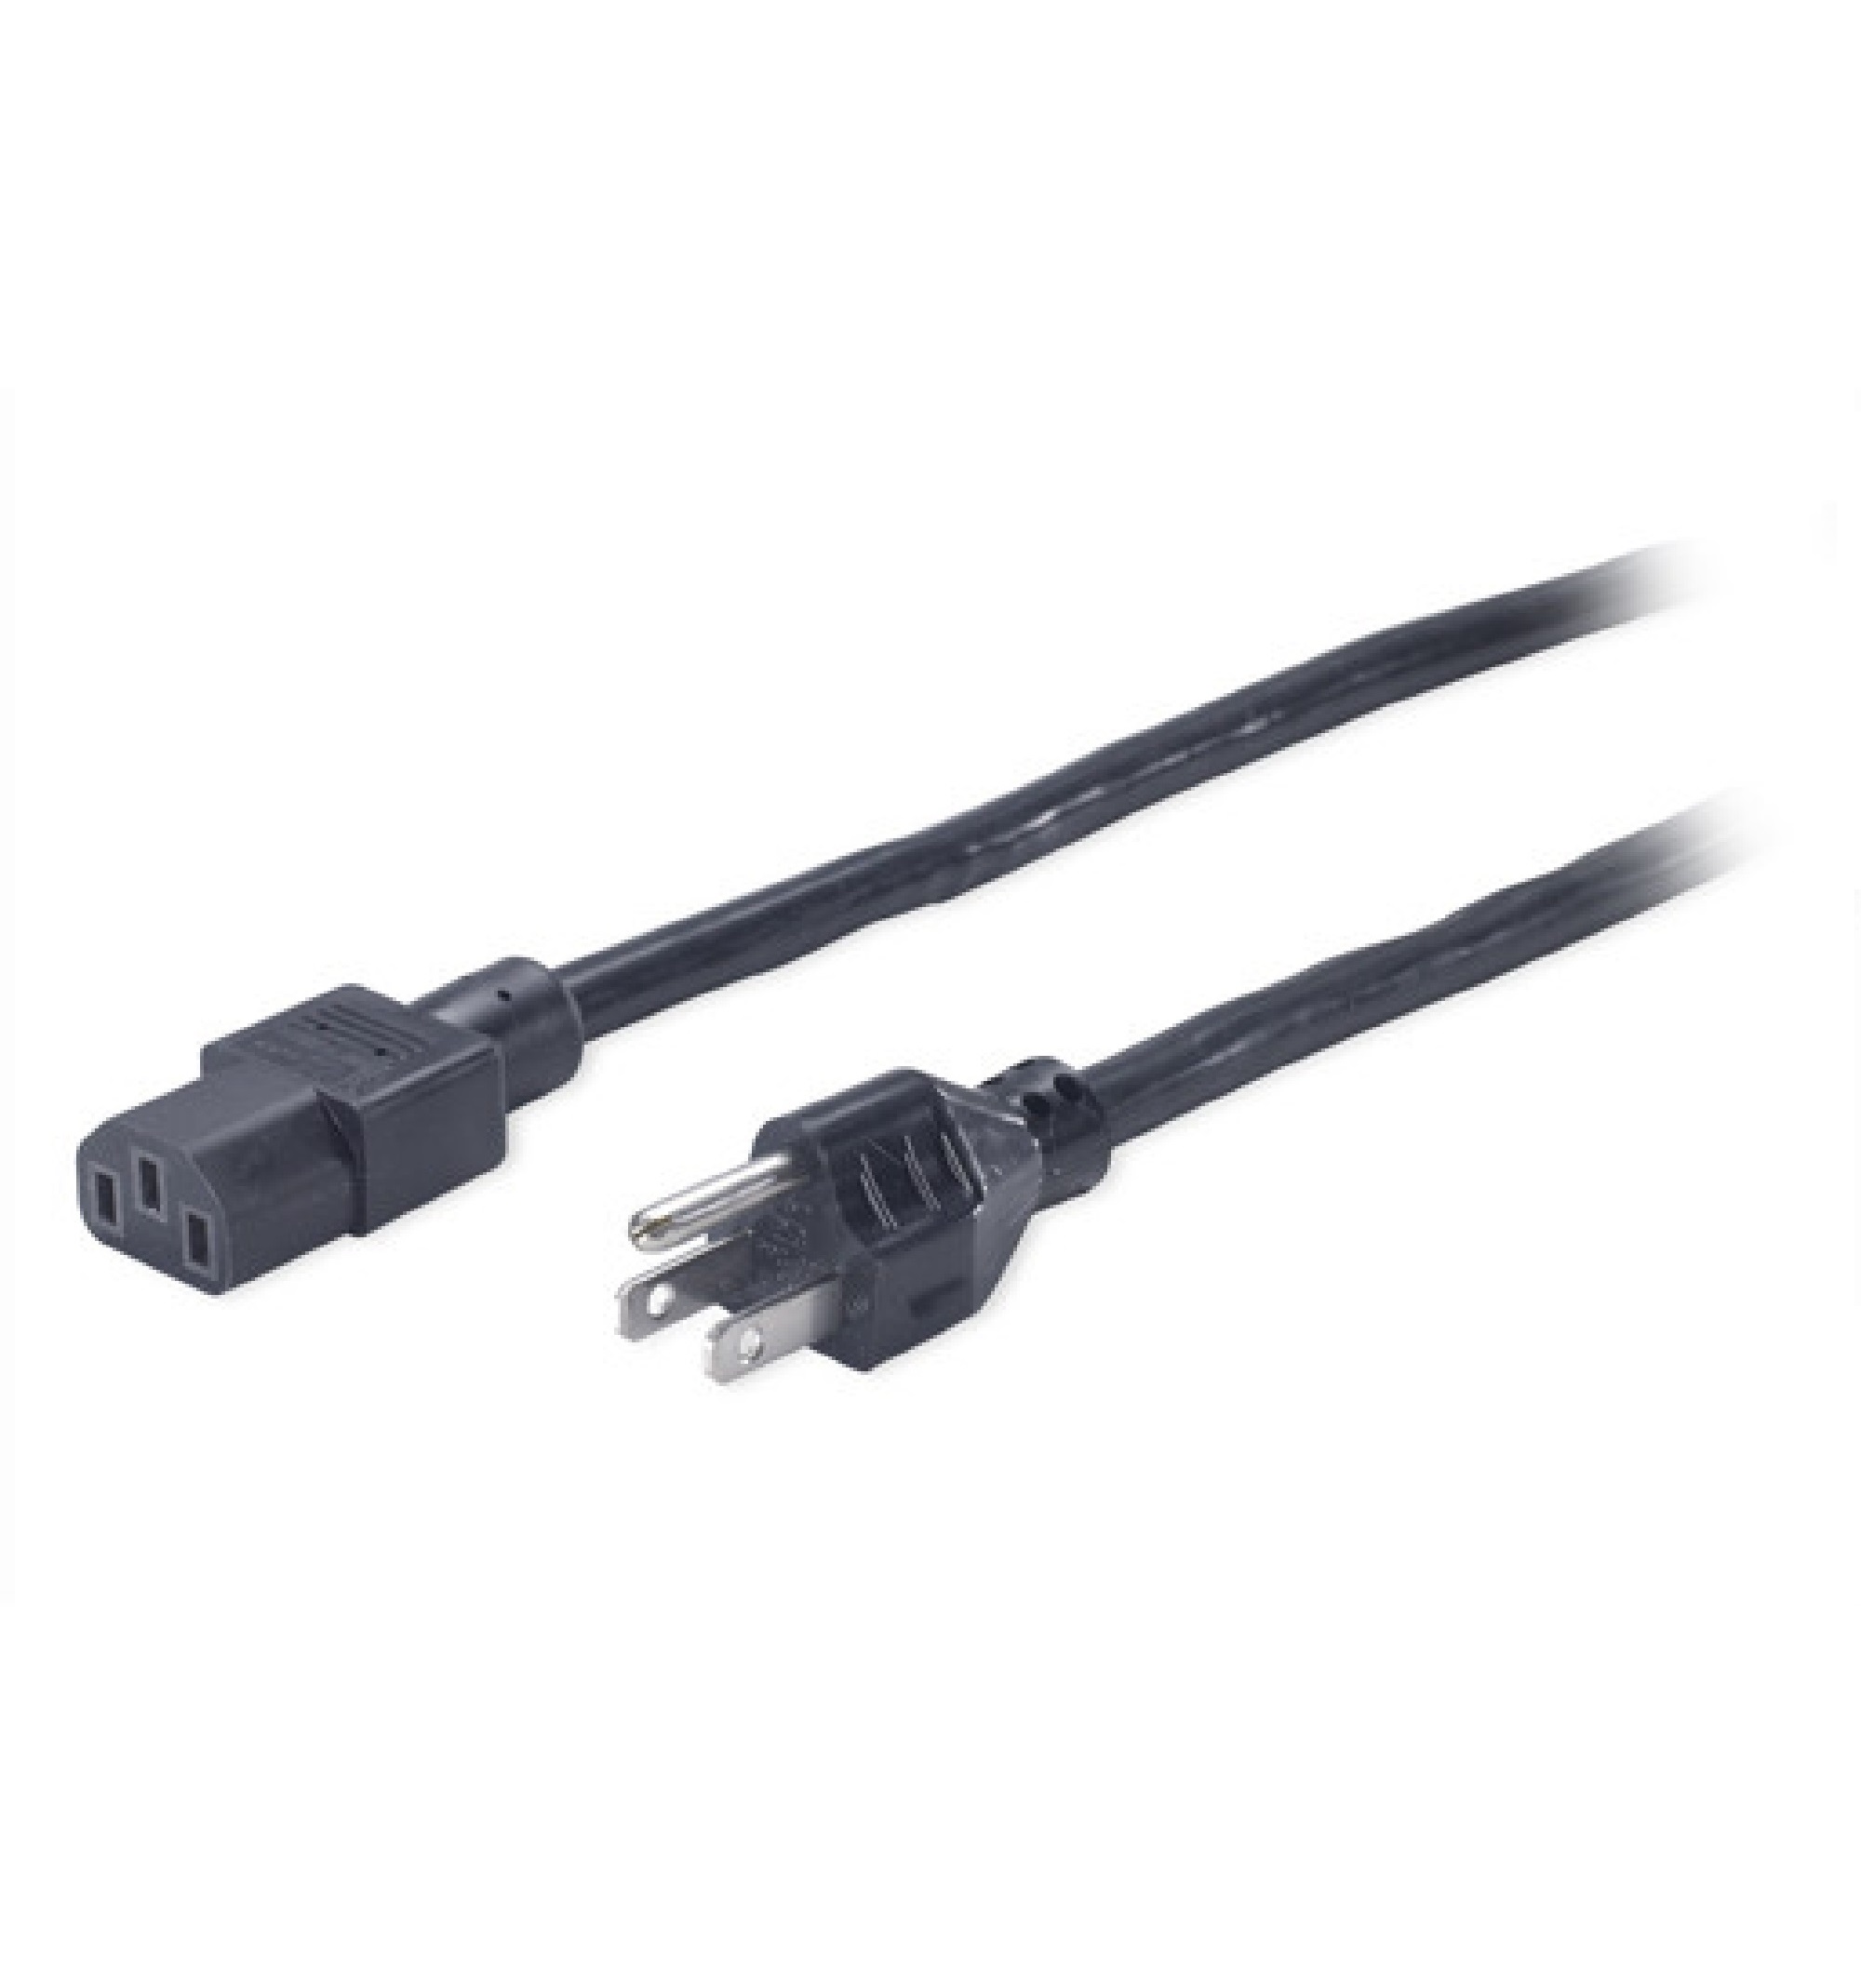 Power Cord, C13 to 5-15P, 2.4m